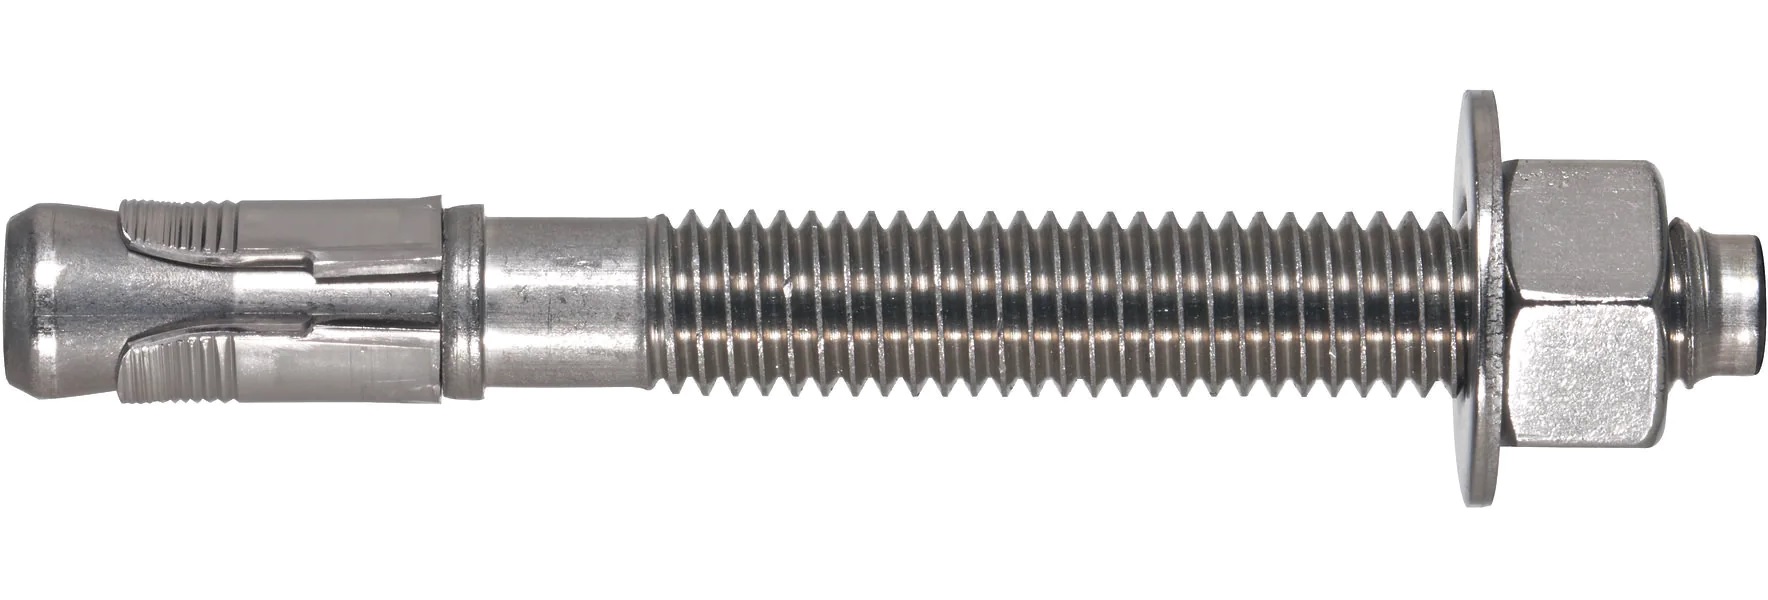 Stud anchor KB3 SS304 3/8x3 LT (Sold in BOX of 50)